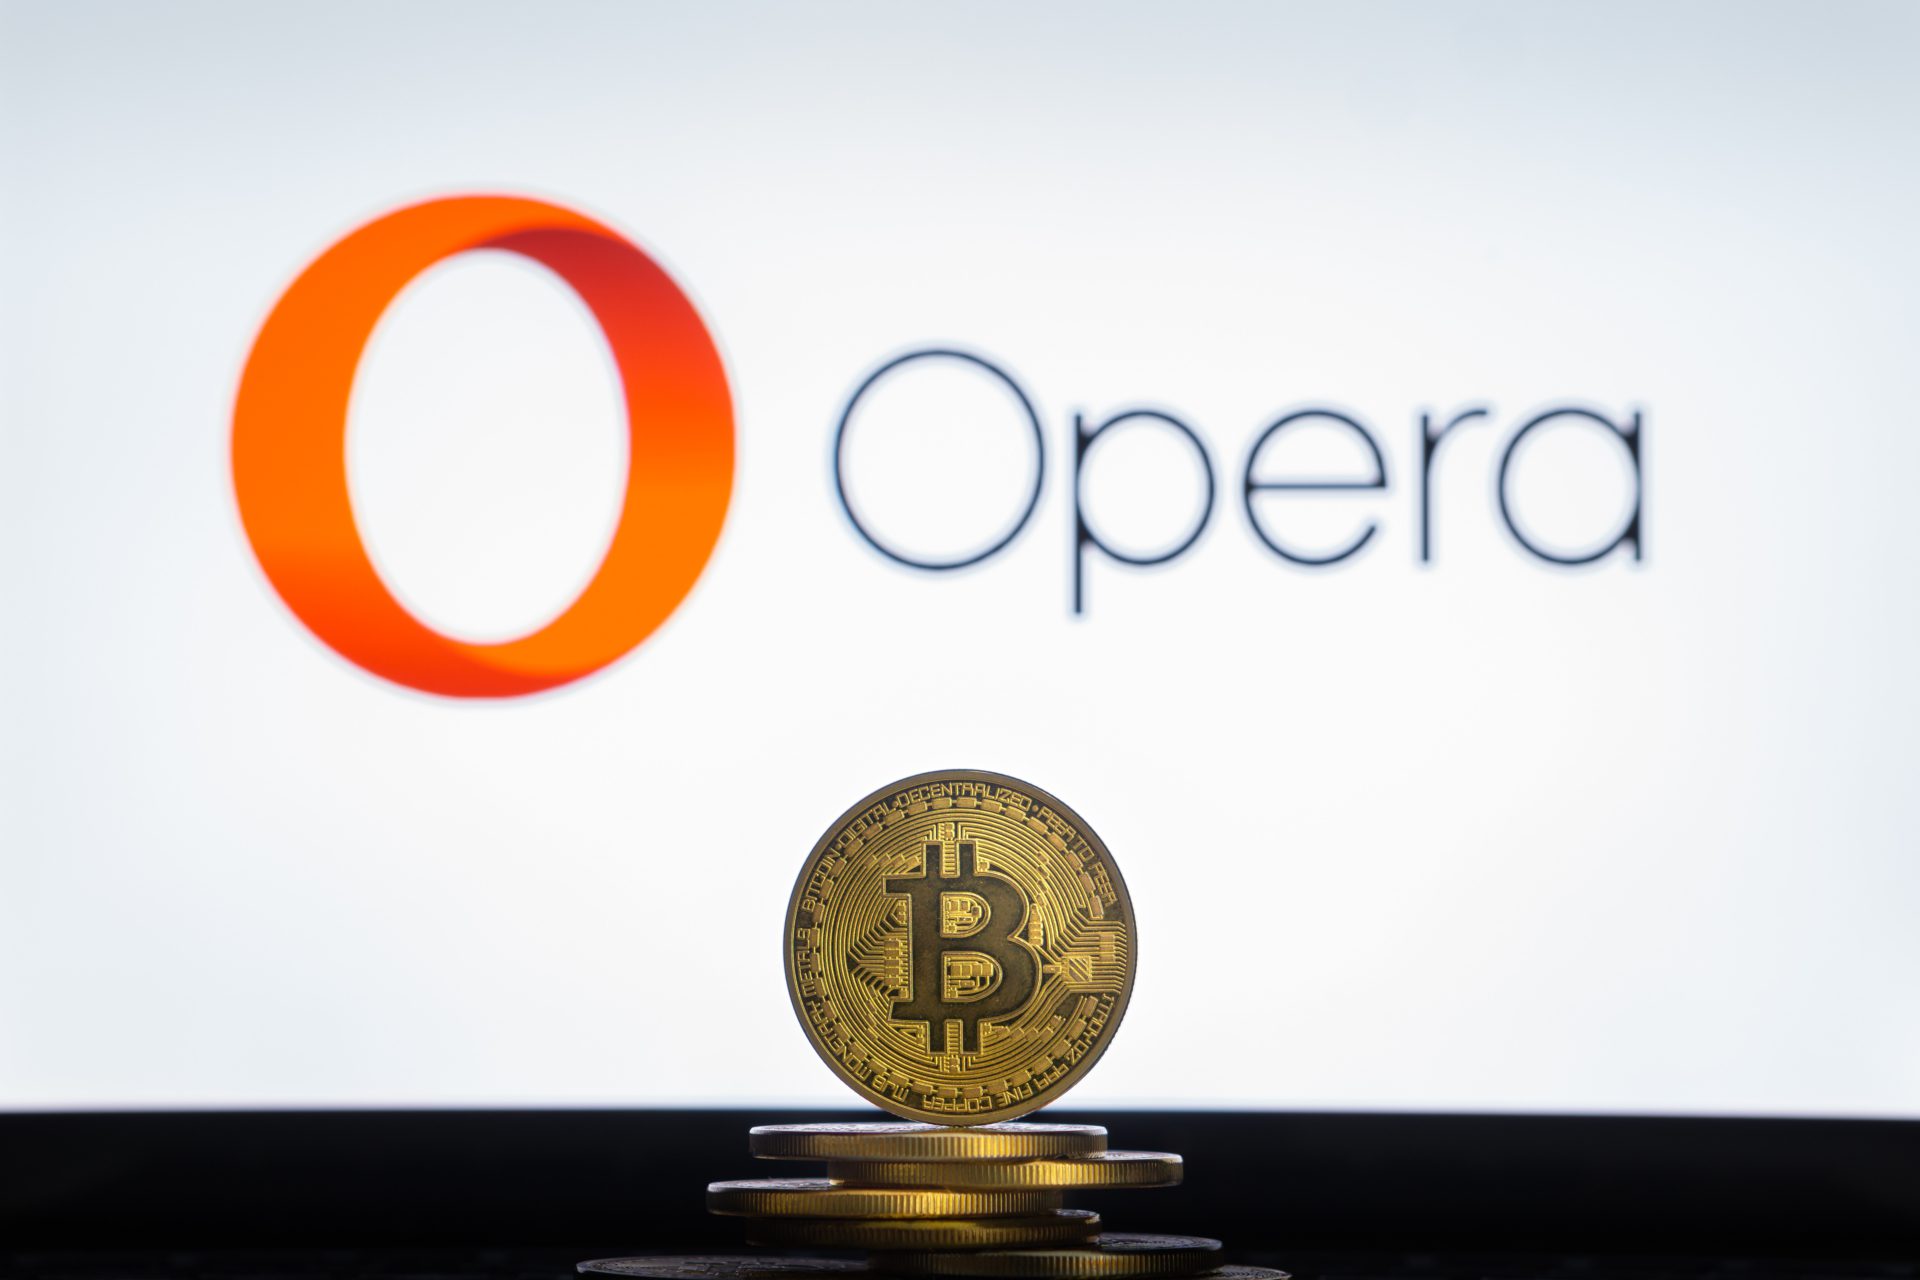 download the last version for ipod Opera Crypto Browser